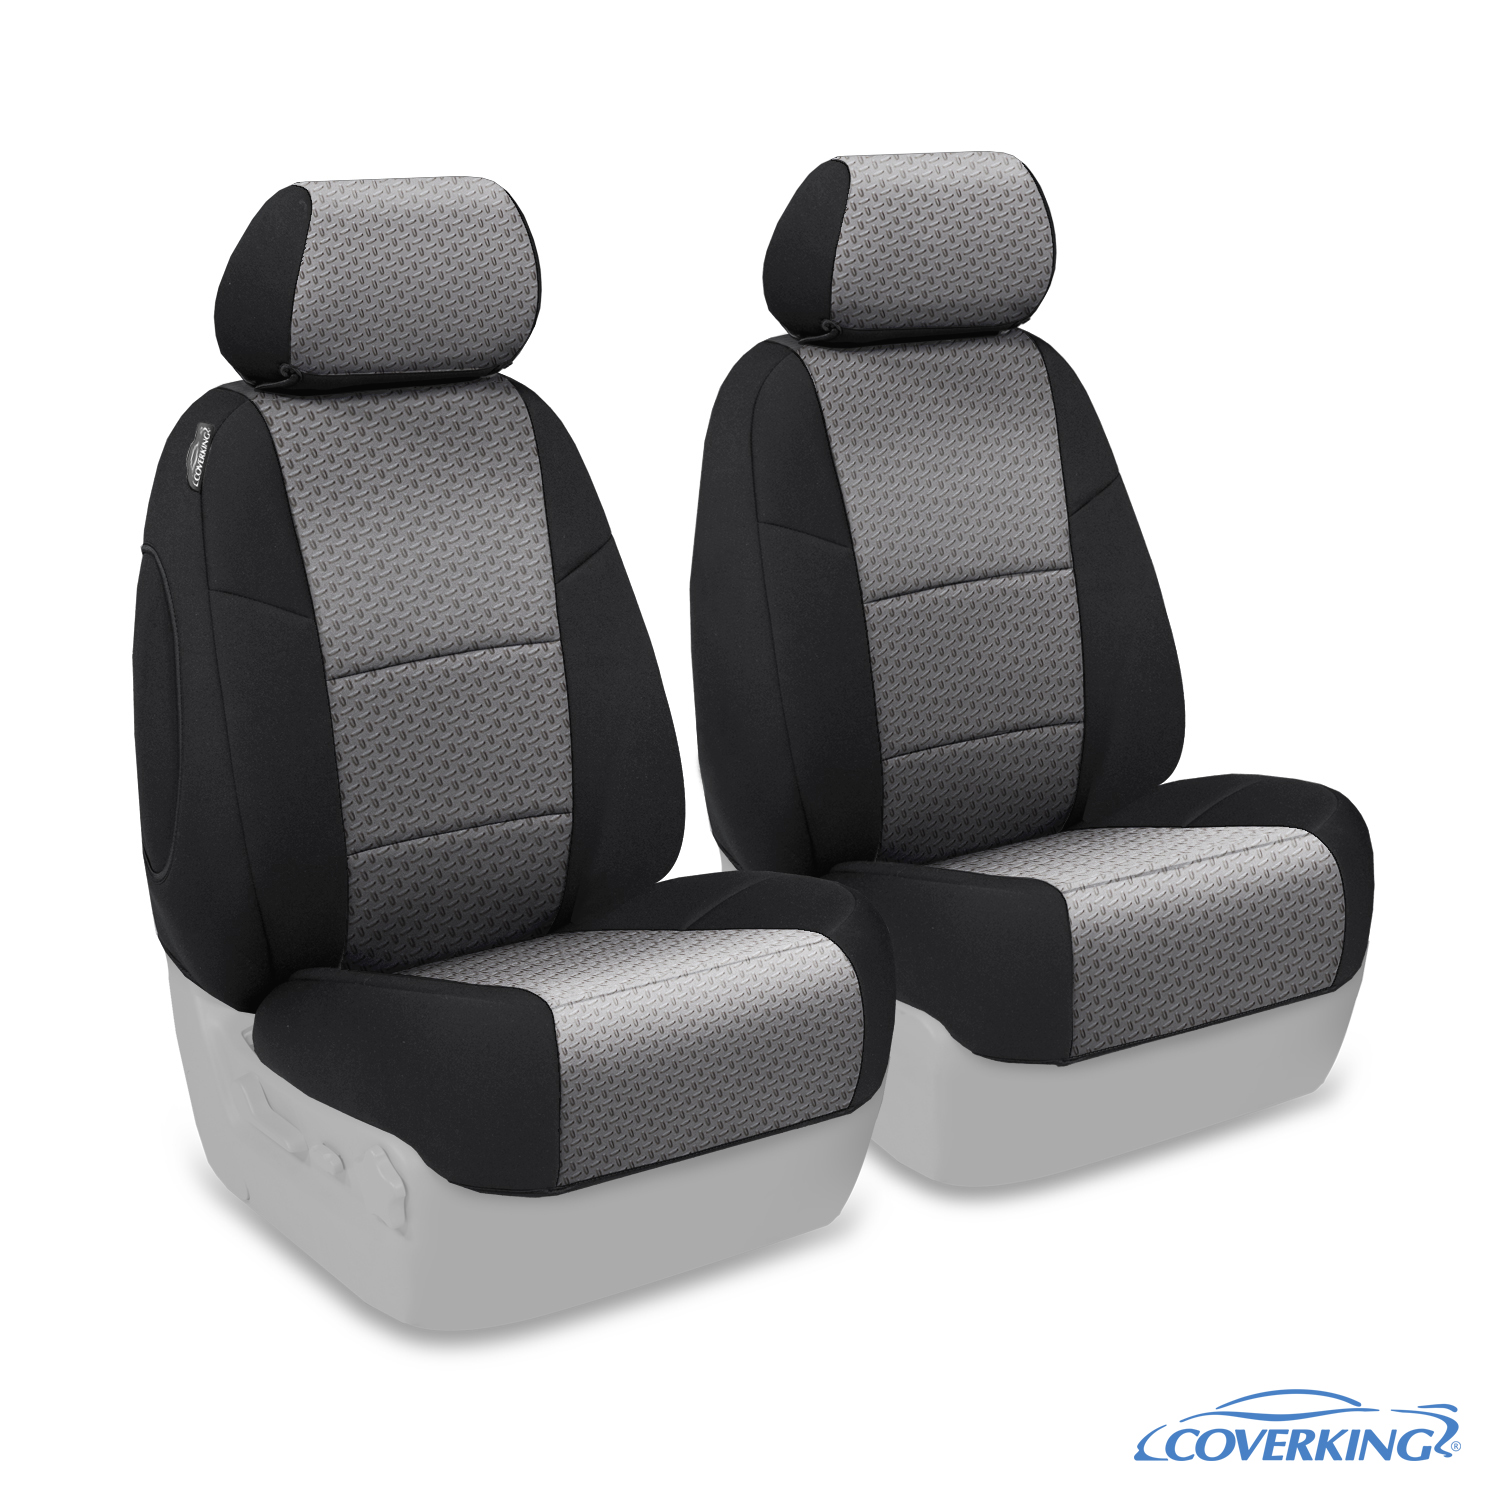 Coverking Neosupreme Front Custom Car Seat Cover For Toyota 2012-2014 Camry